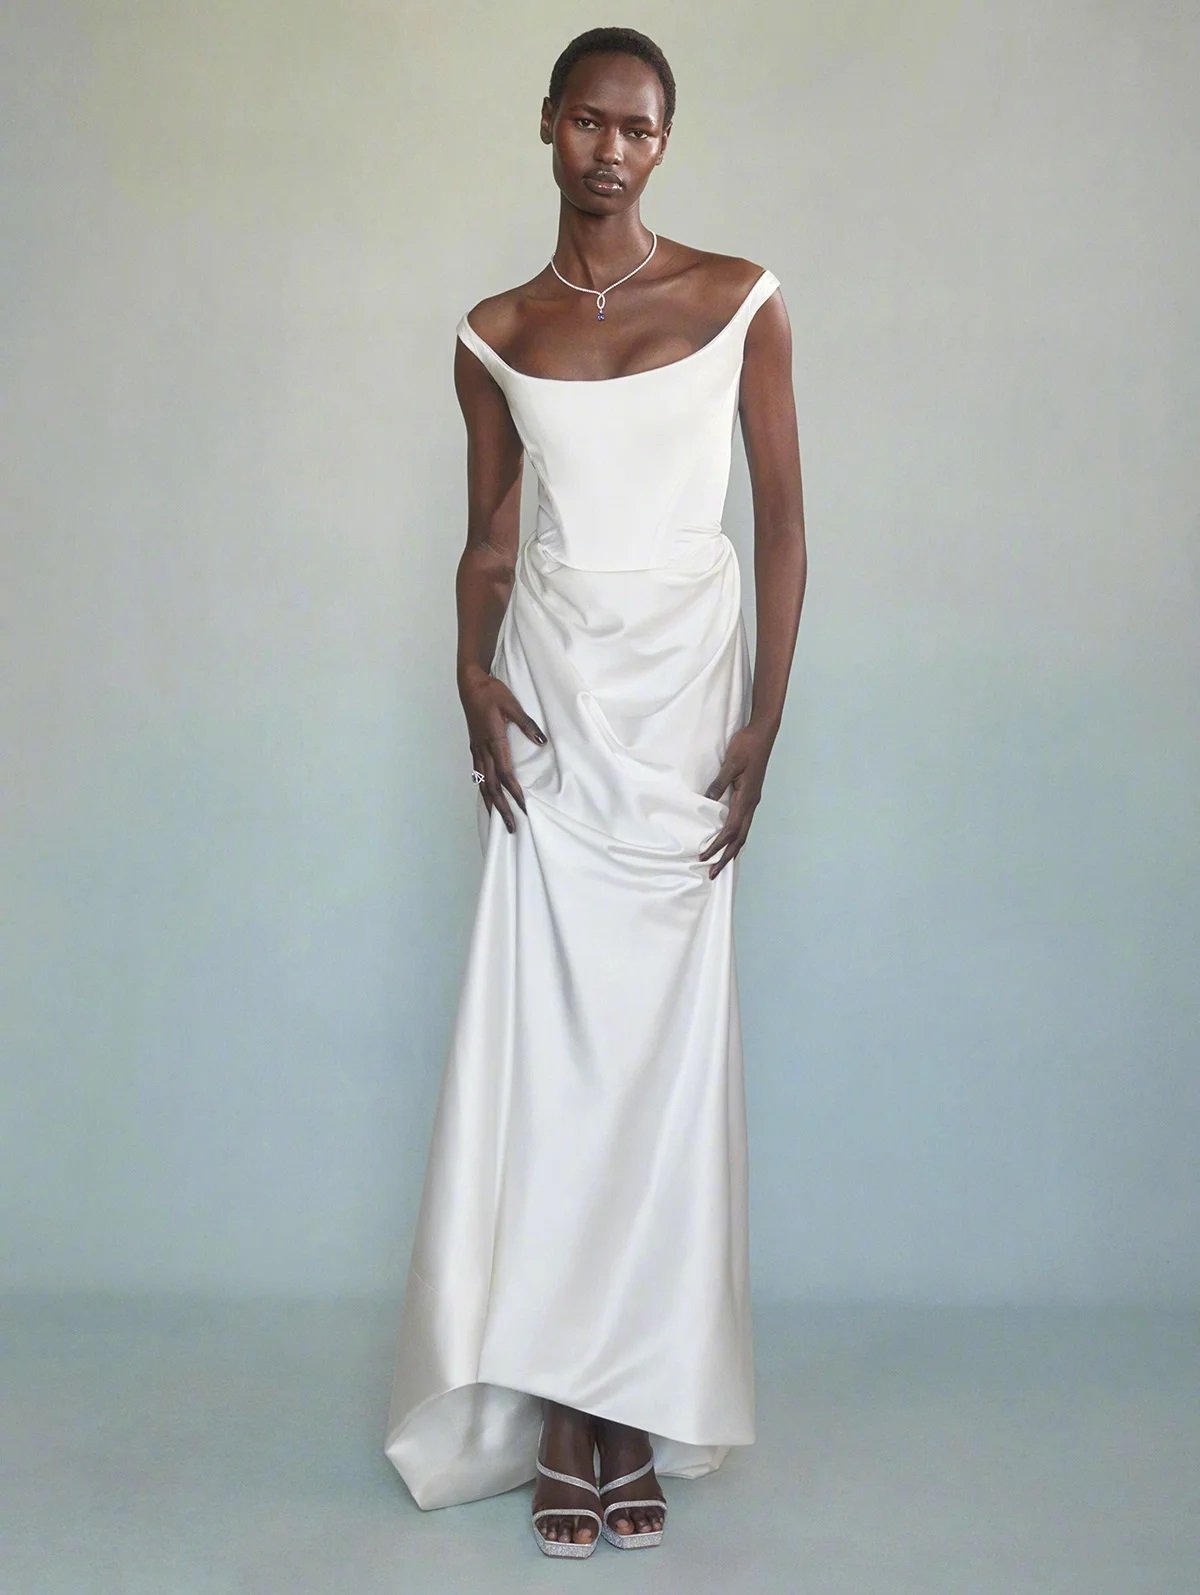 Nyarach Abouch Ayuel Covers Vogue Weddings May 2022 — Anne of Carversville